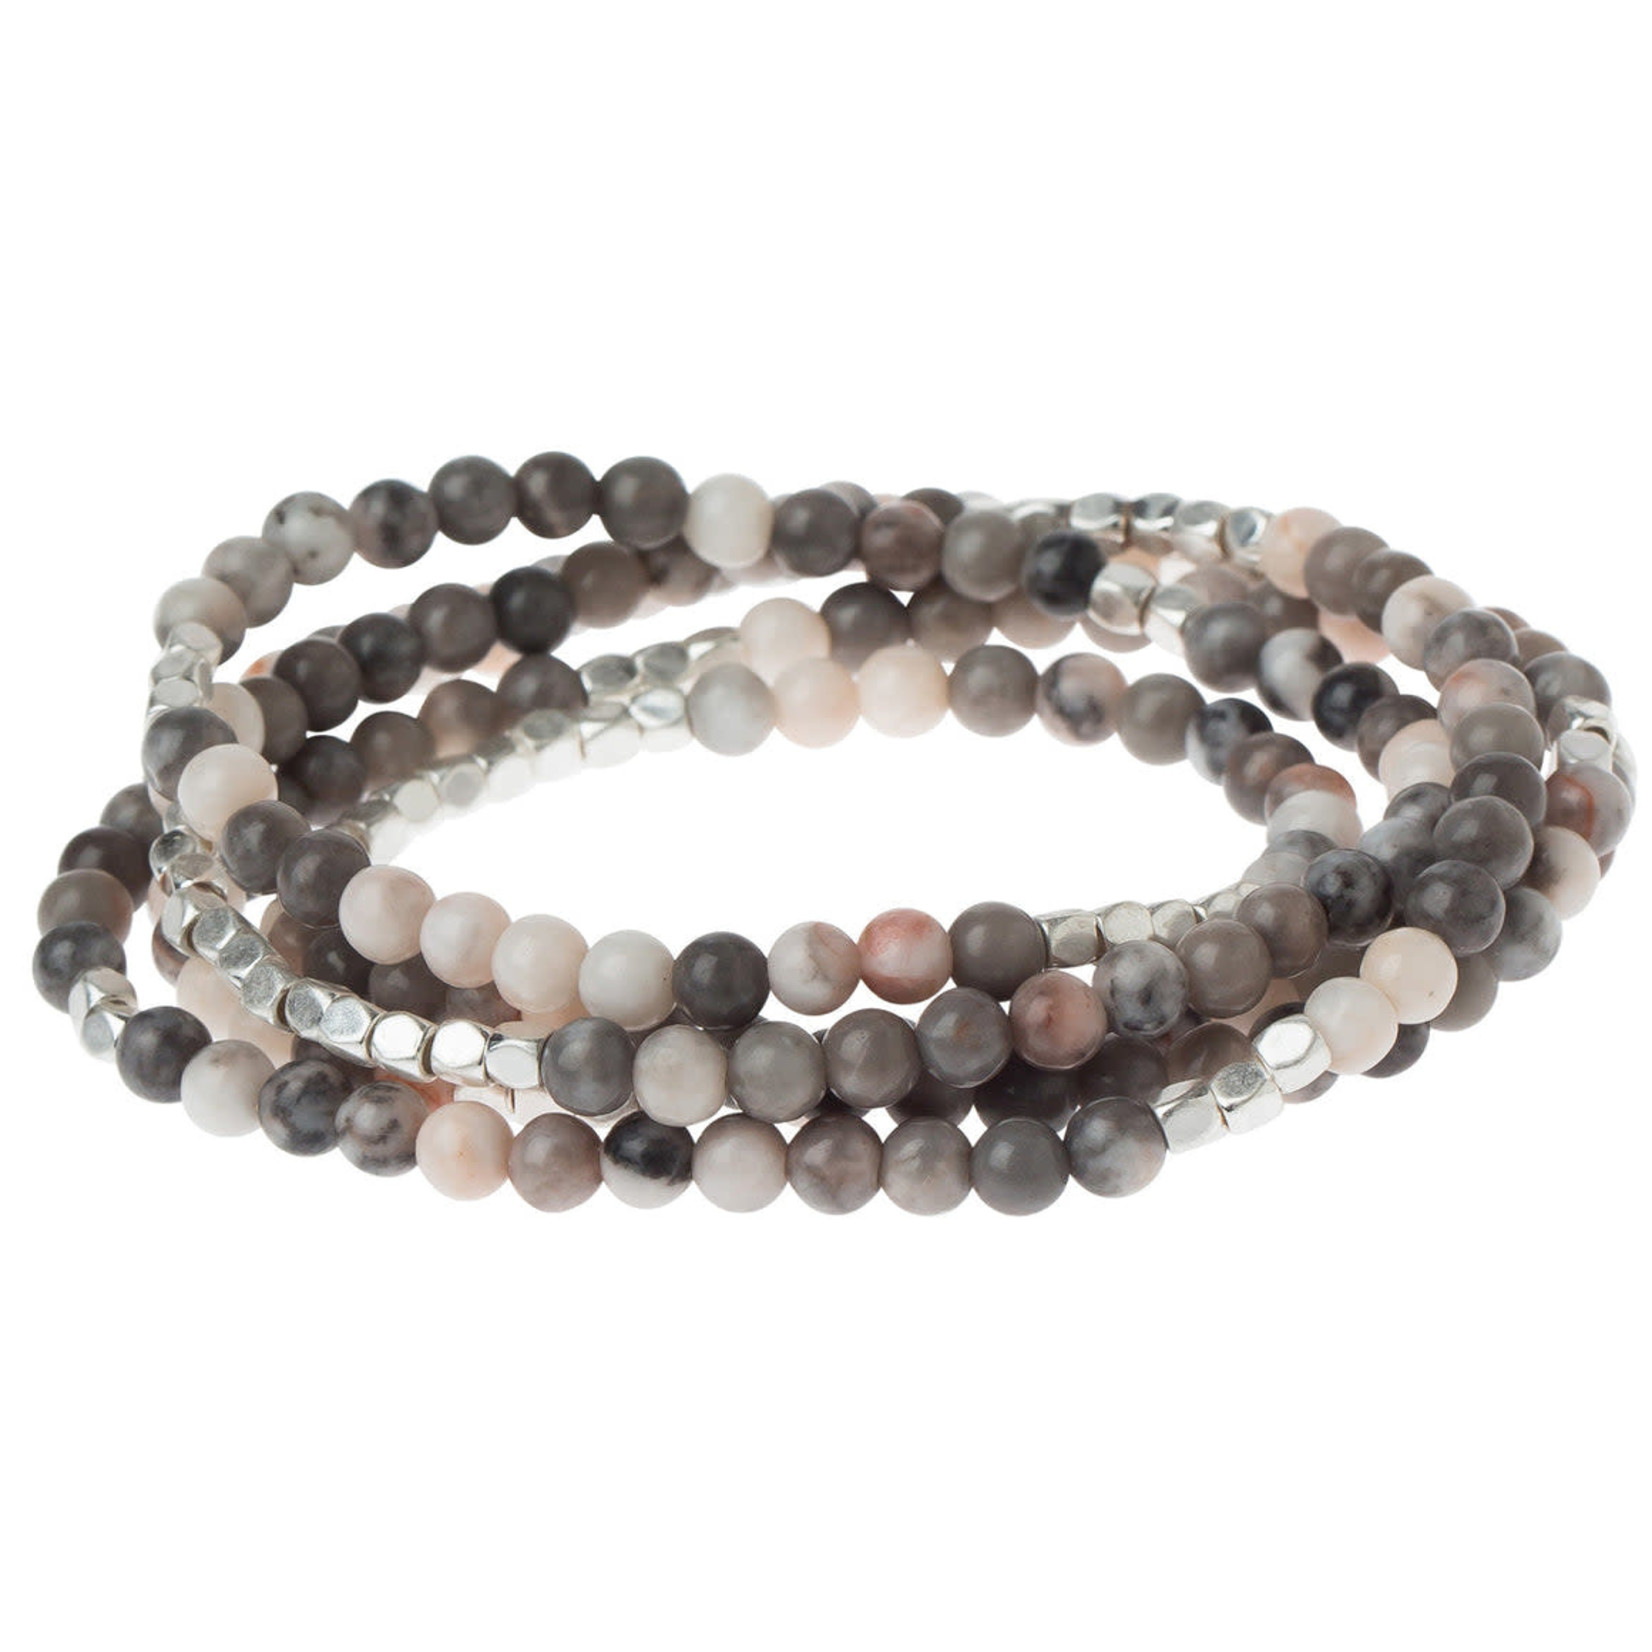 Scout Curated Wears Stone Wrap Bracelet/Necklace